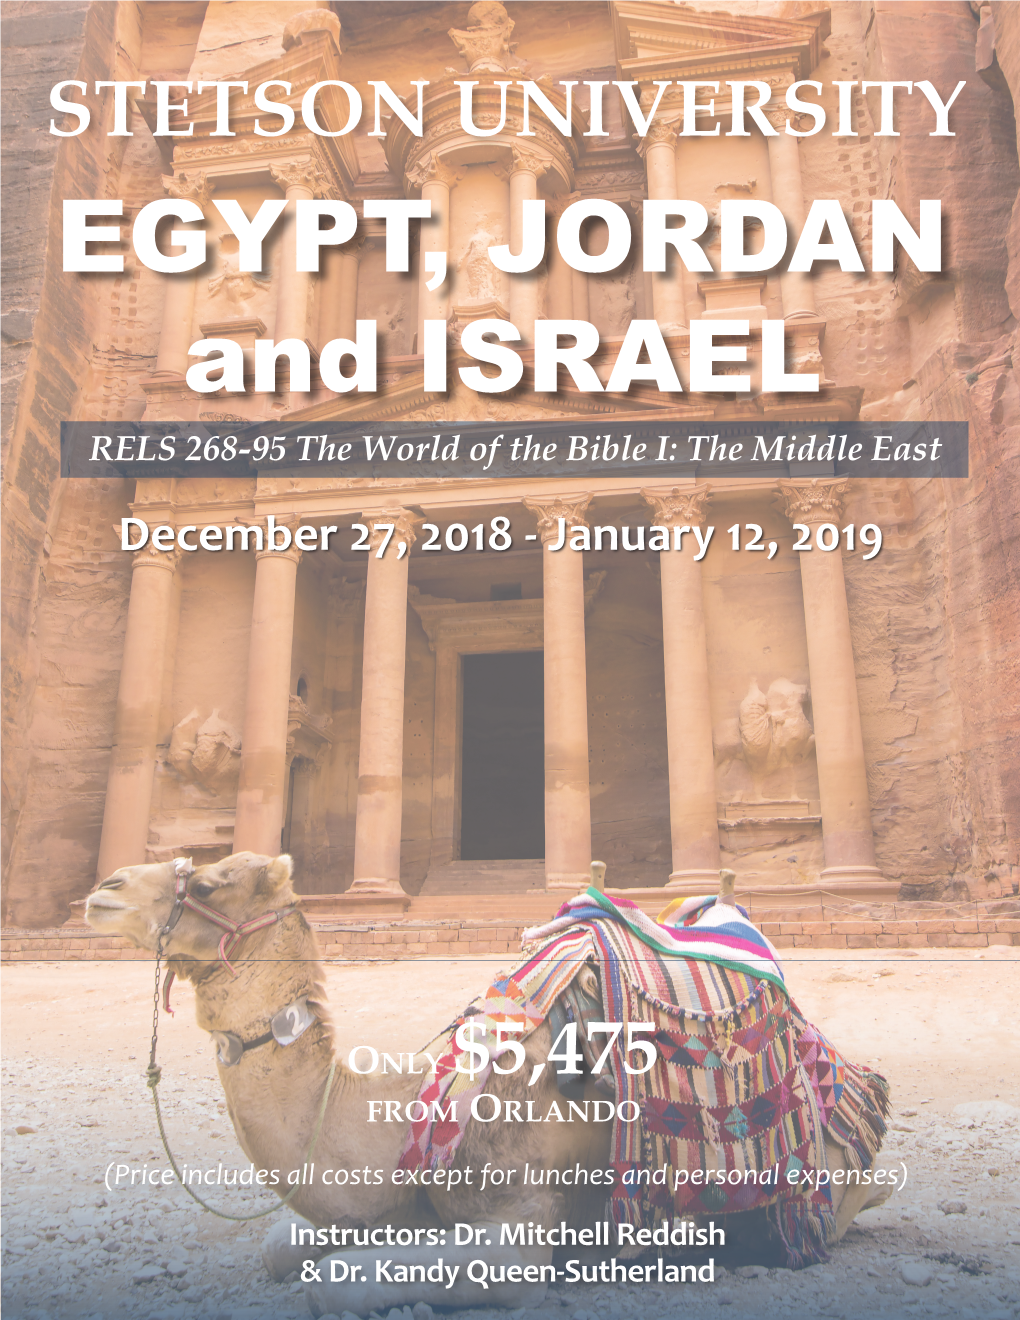 EGYPT, JORDAN and ISRAEL RELS 268-95 the World of the Bible I: the Middle East December 27, 2018 - January 12, 2019